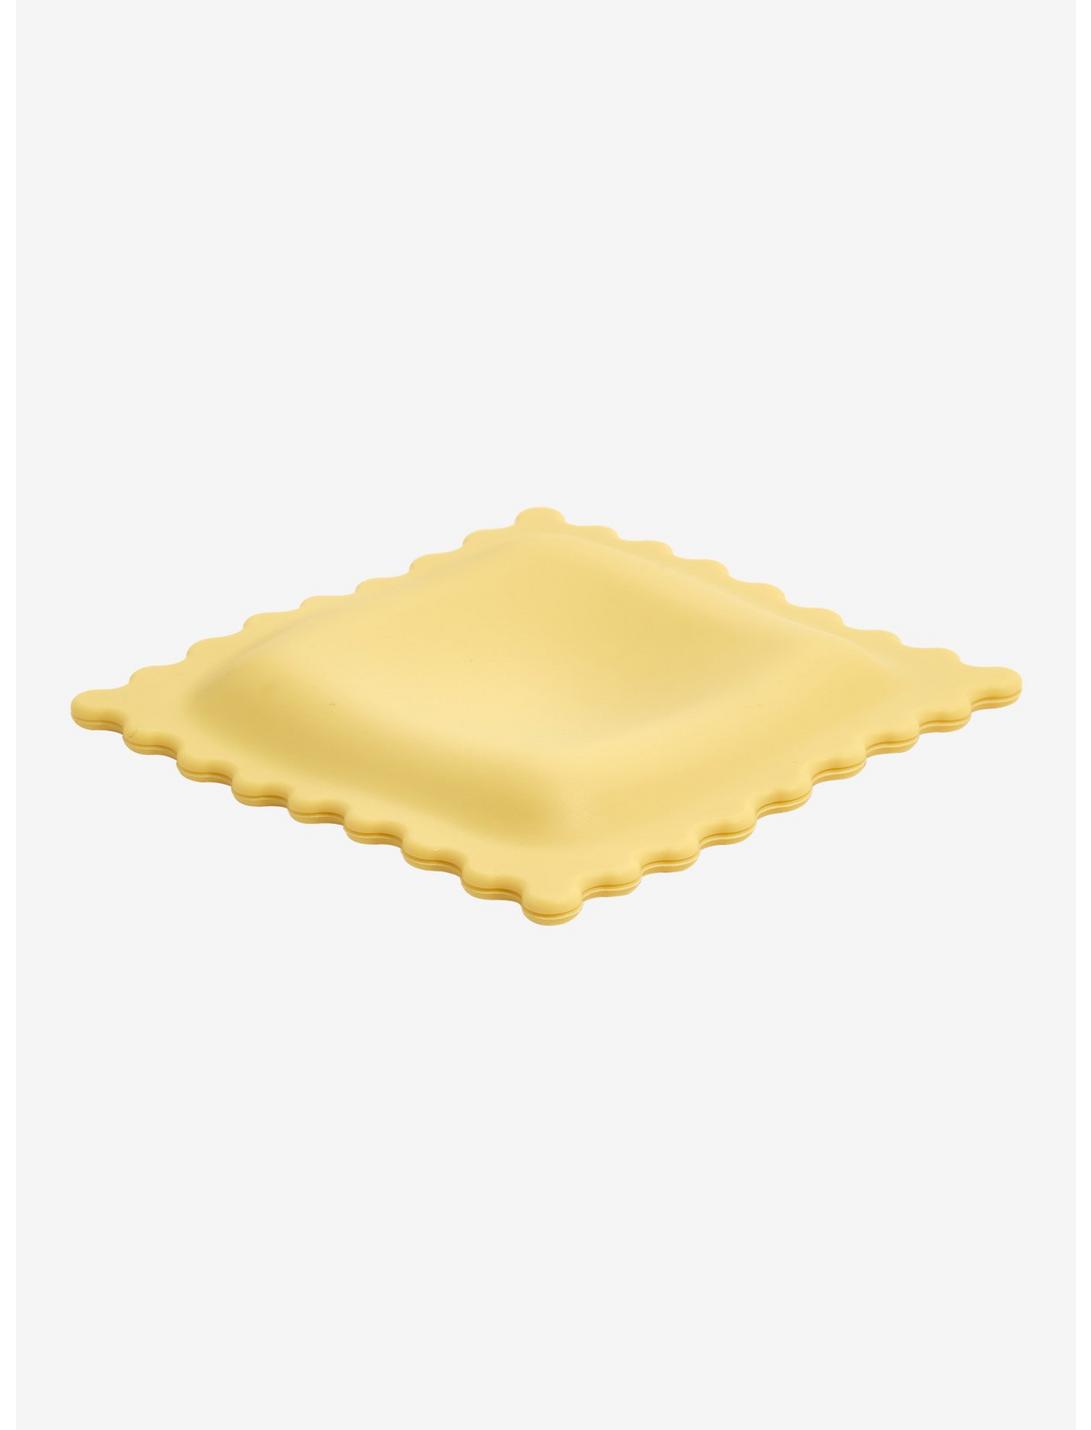 Fred Sauced Up Pasta Shaped Spoon Rest, , hi-res